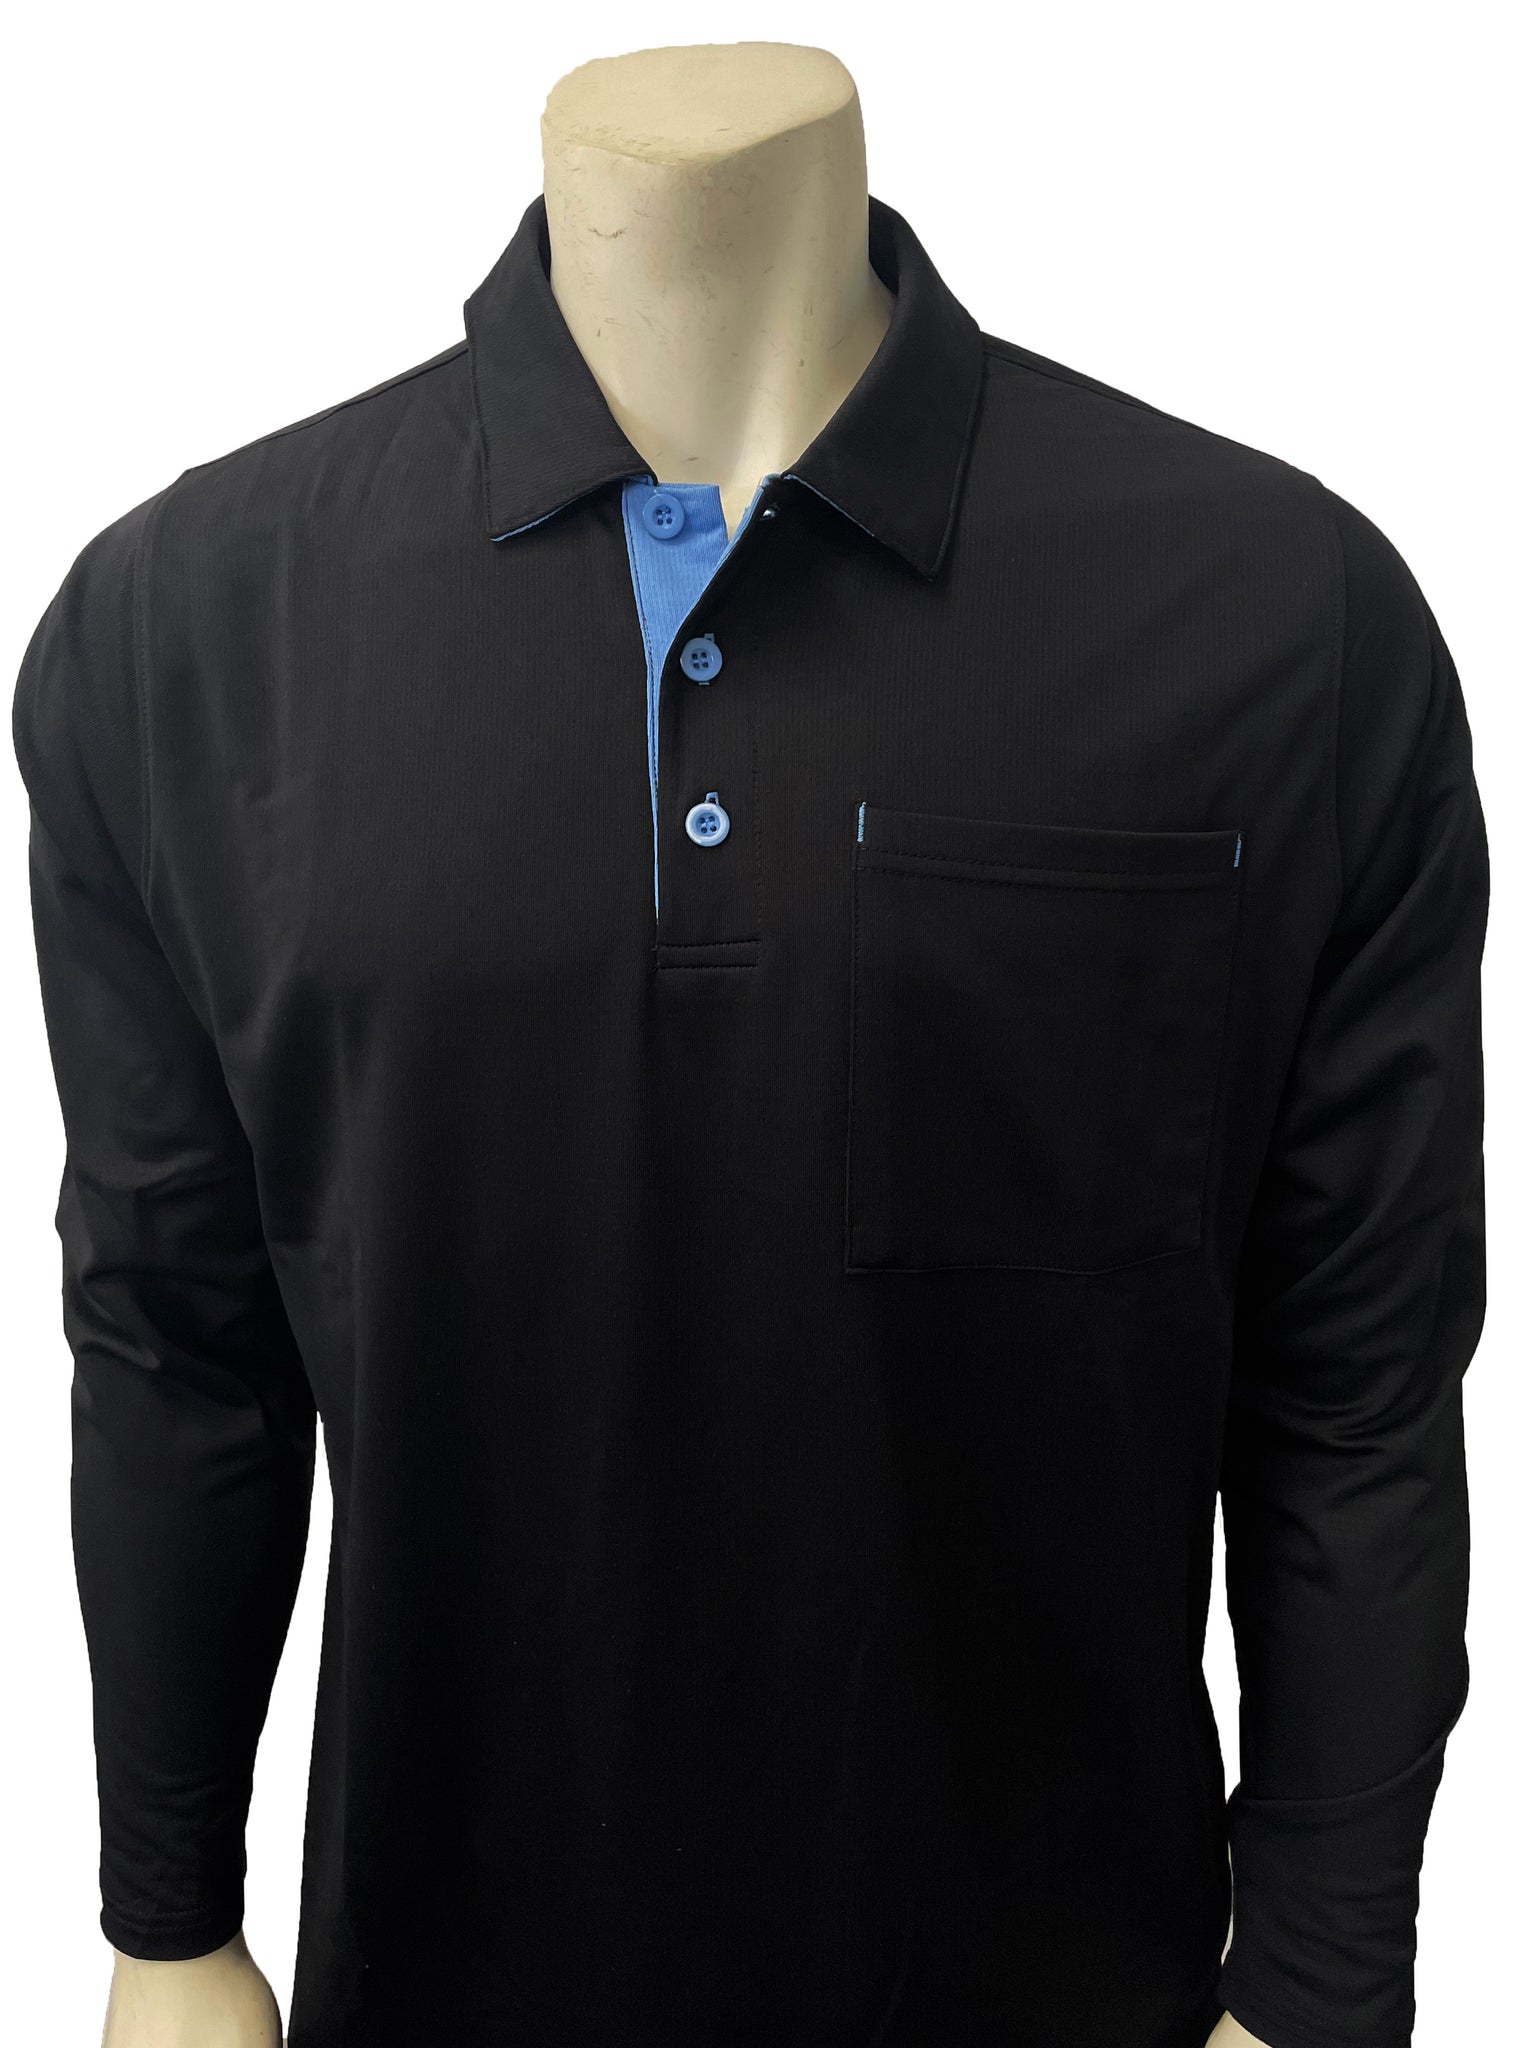 BBS-350 - Smitty "New Major League" Style Long Sleeve Umpire Shirts - Available in Black and Blue